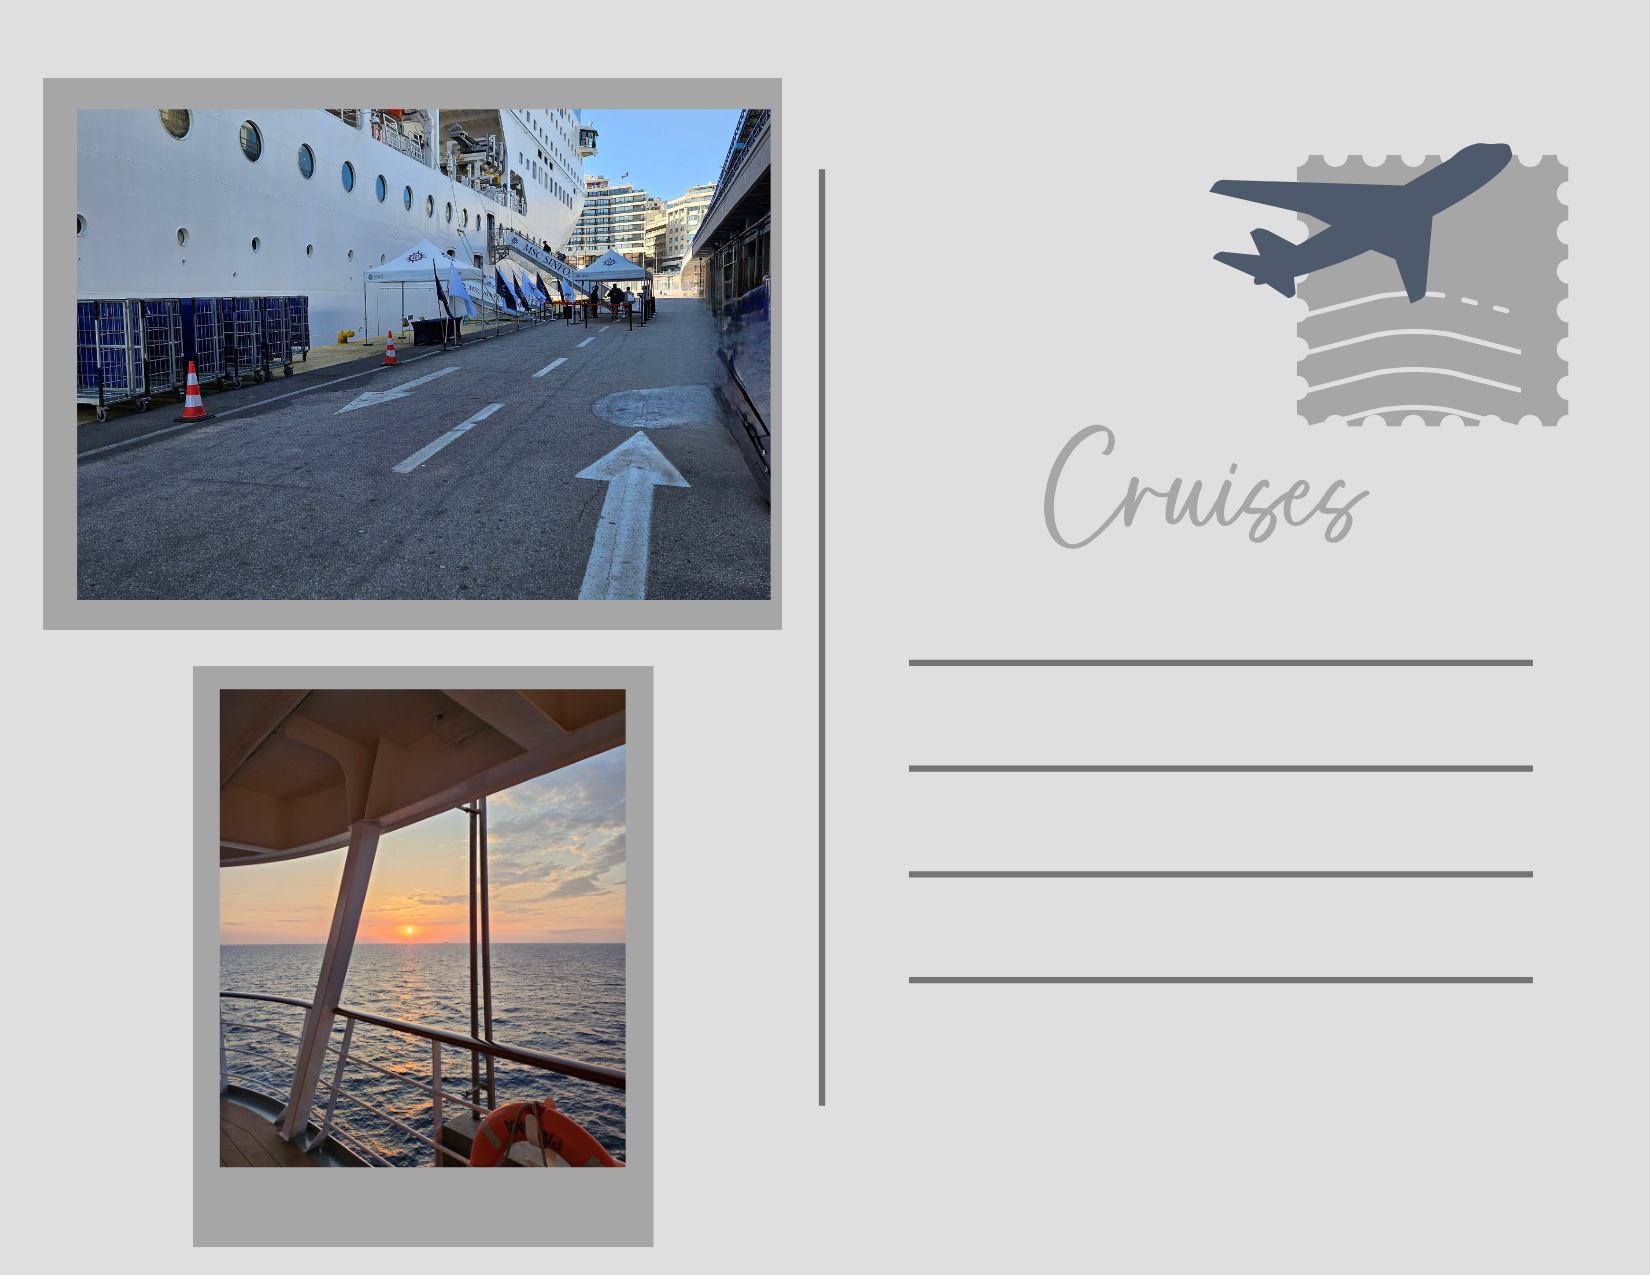 Postcard for cruises